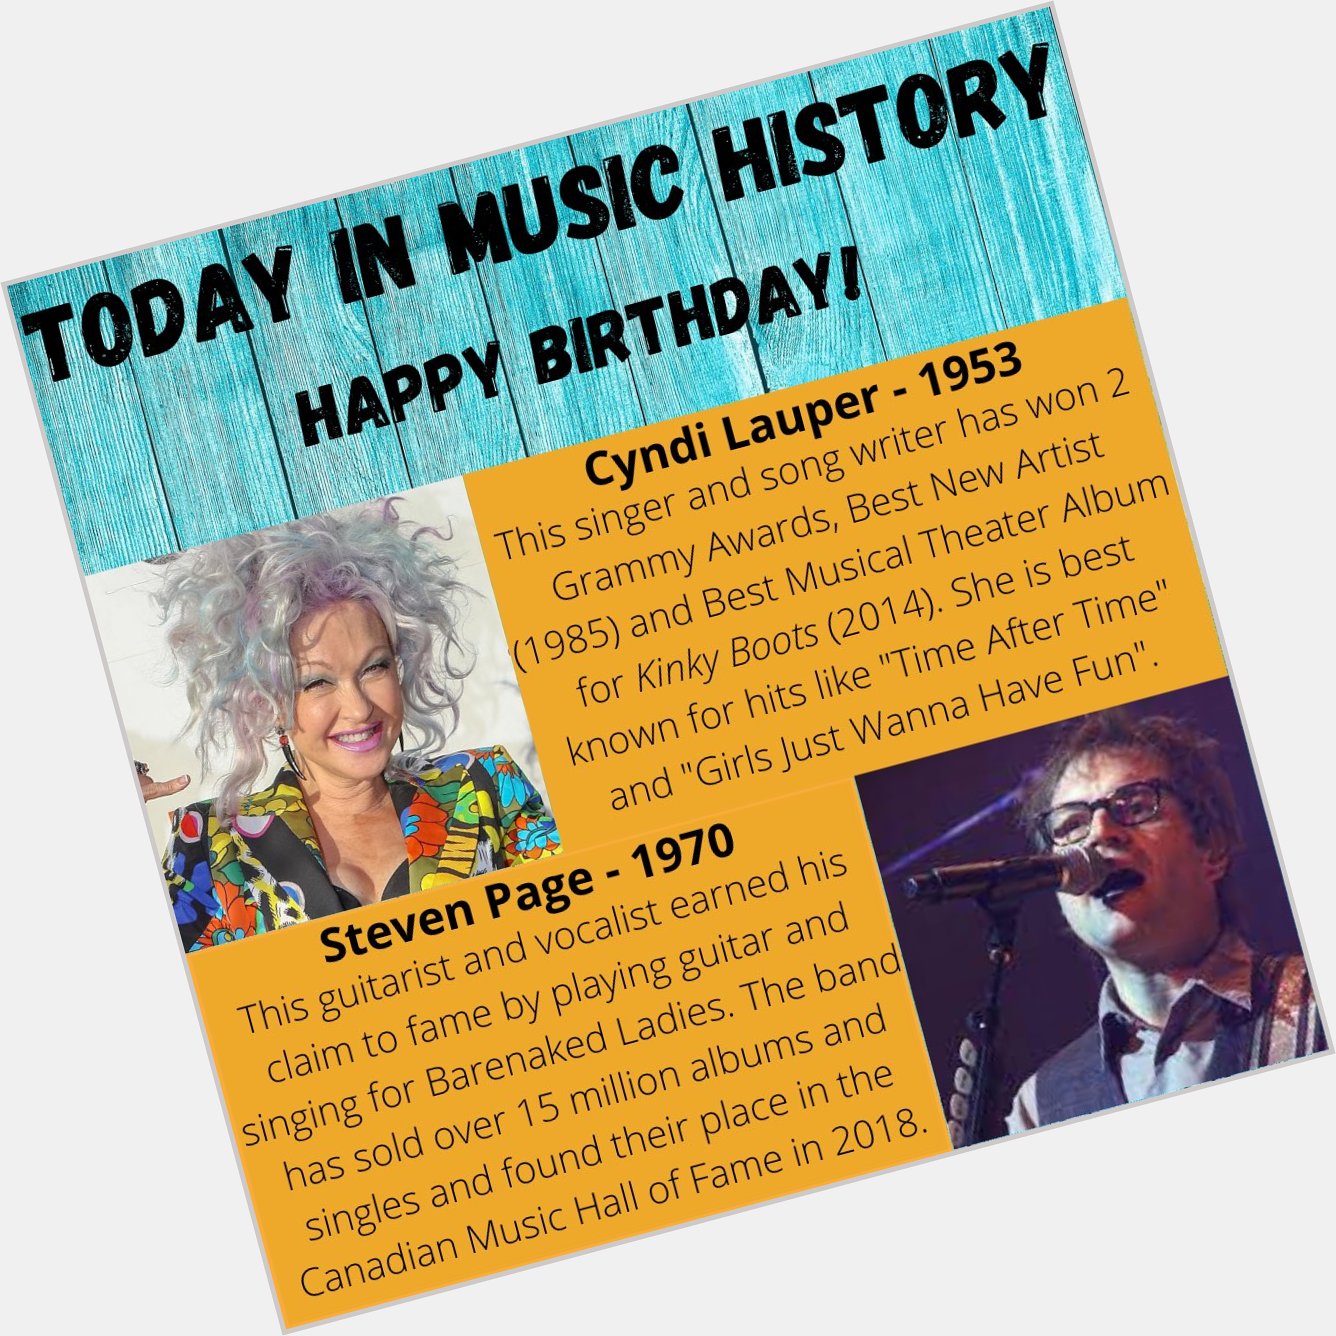 Happy Birthday to Cyndi Lauper and Steven Page! 